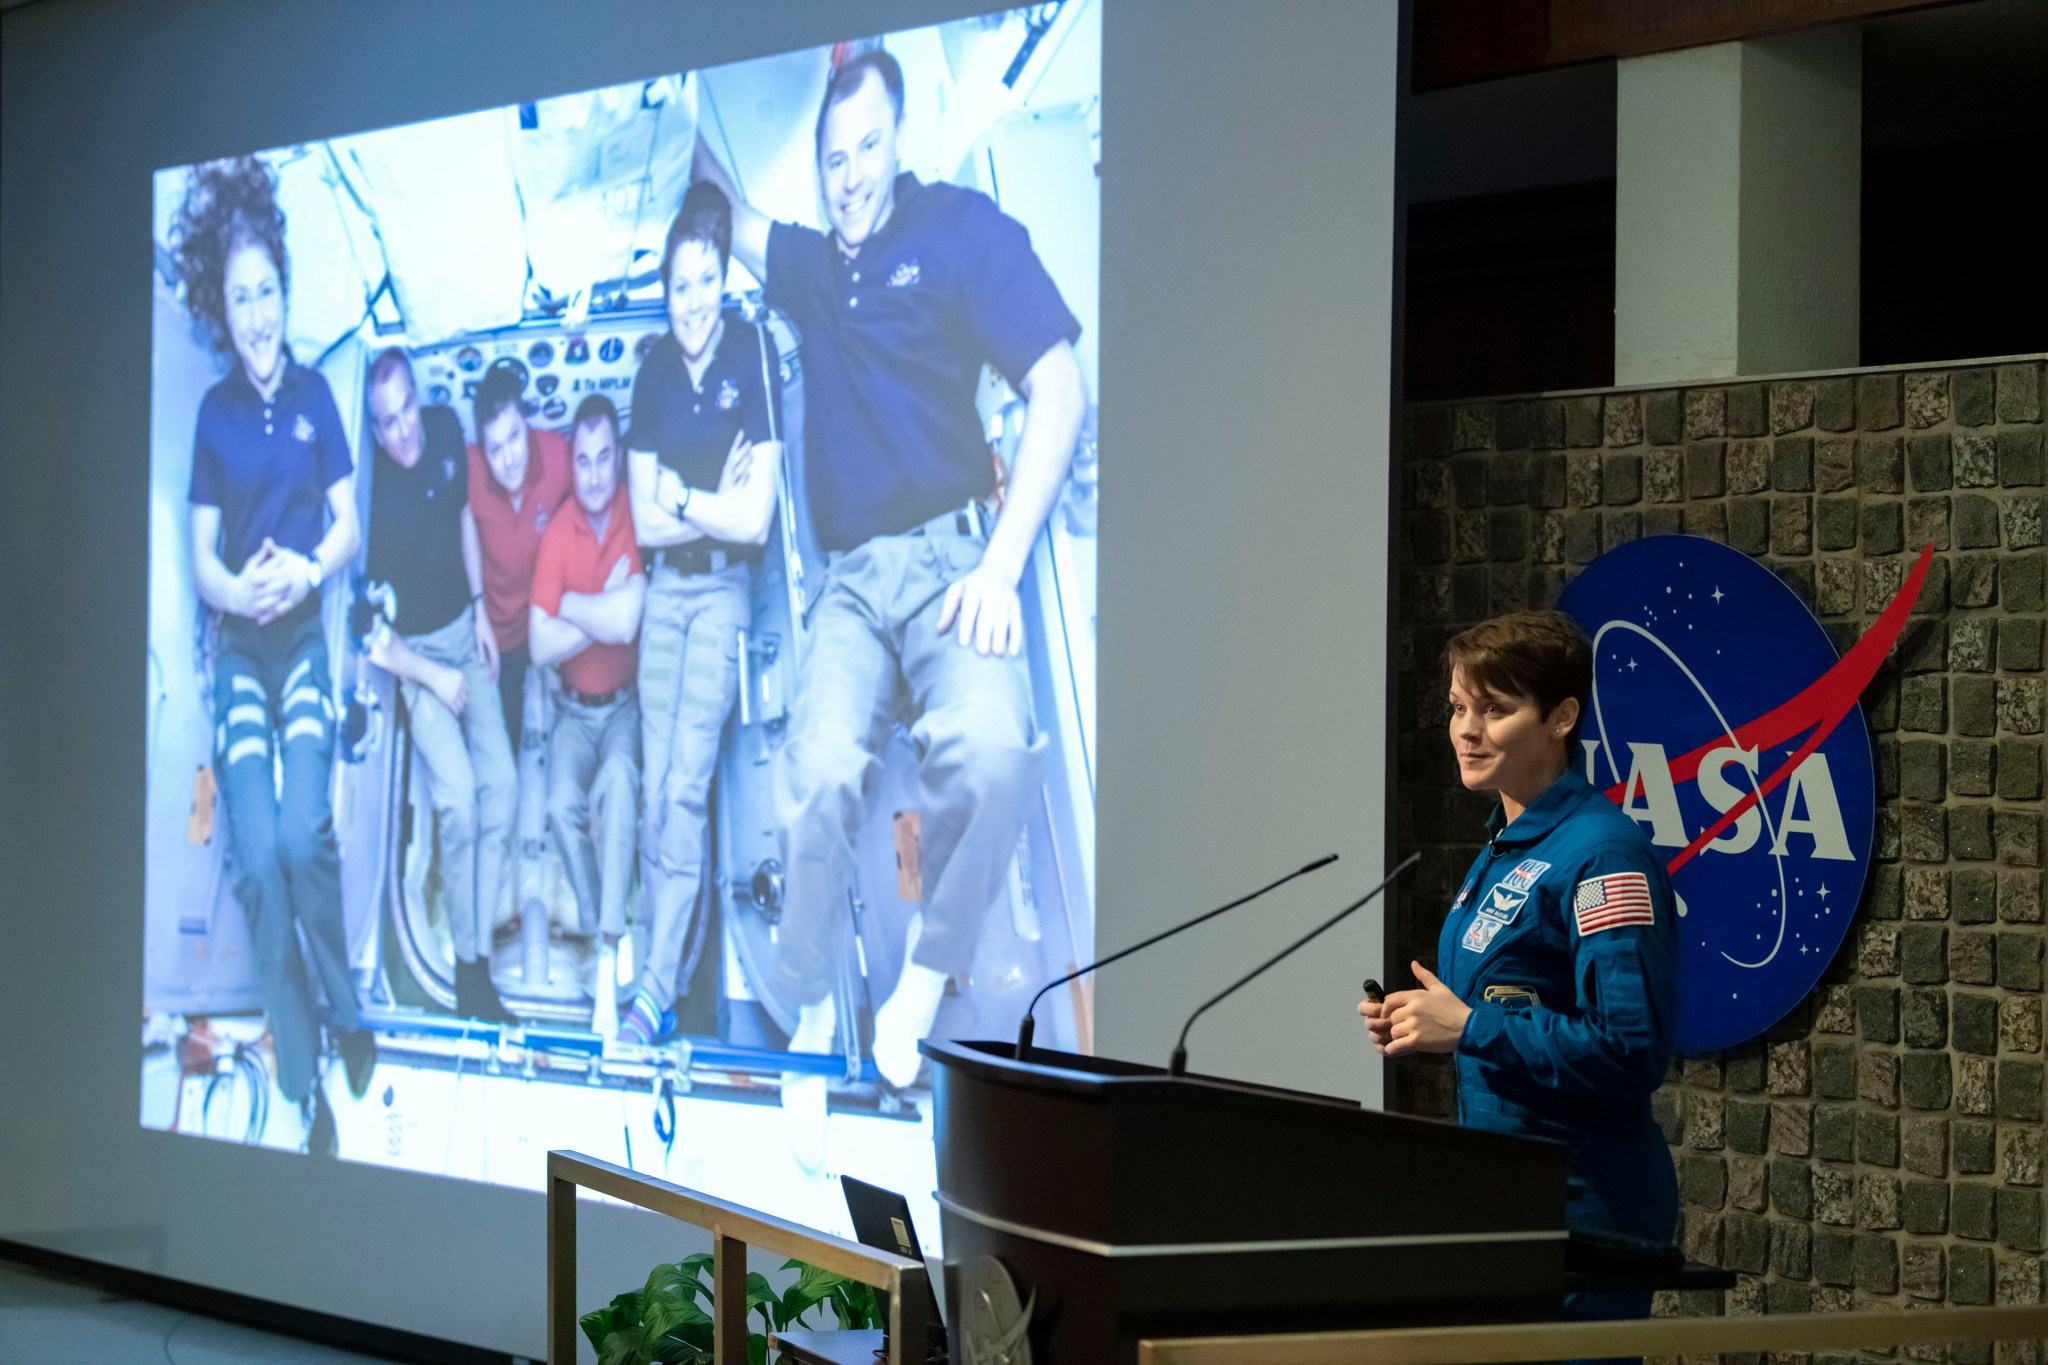 NASA astronaut Anne McClain shares about her experiences on the International Space Station as part of the Expedition 58-59 crew